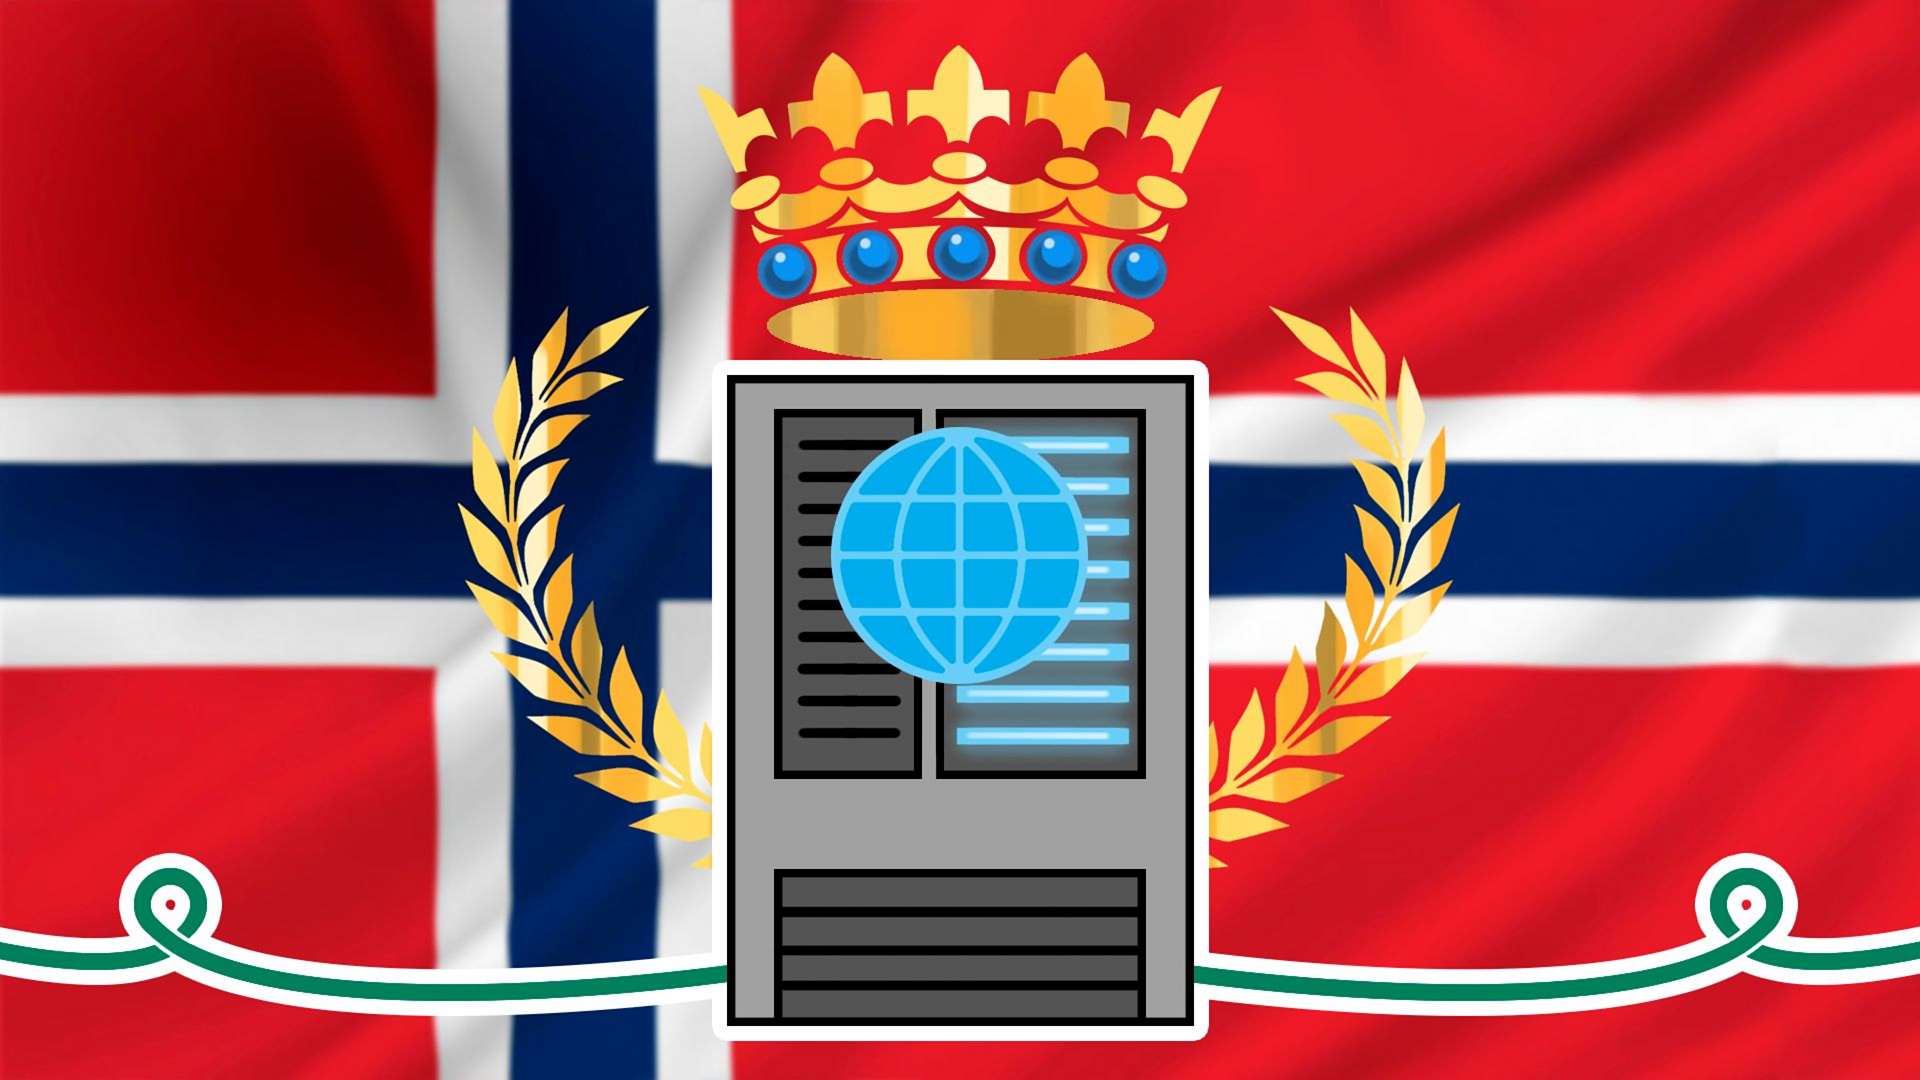 Norwegian government wants to make Norway the world leader in hosting services